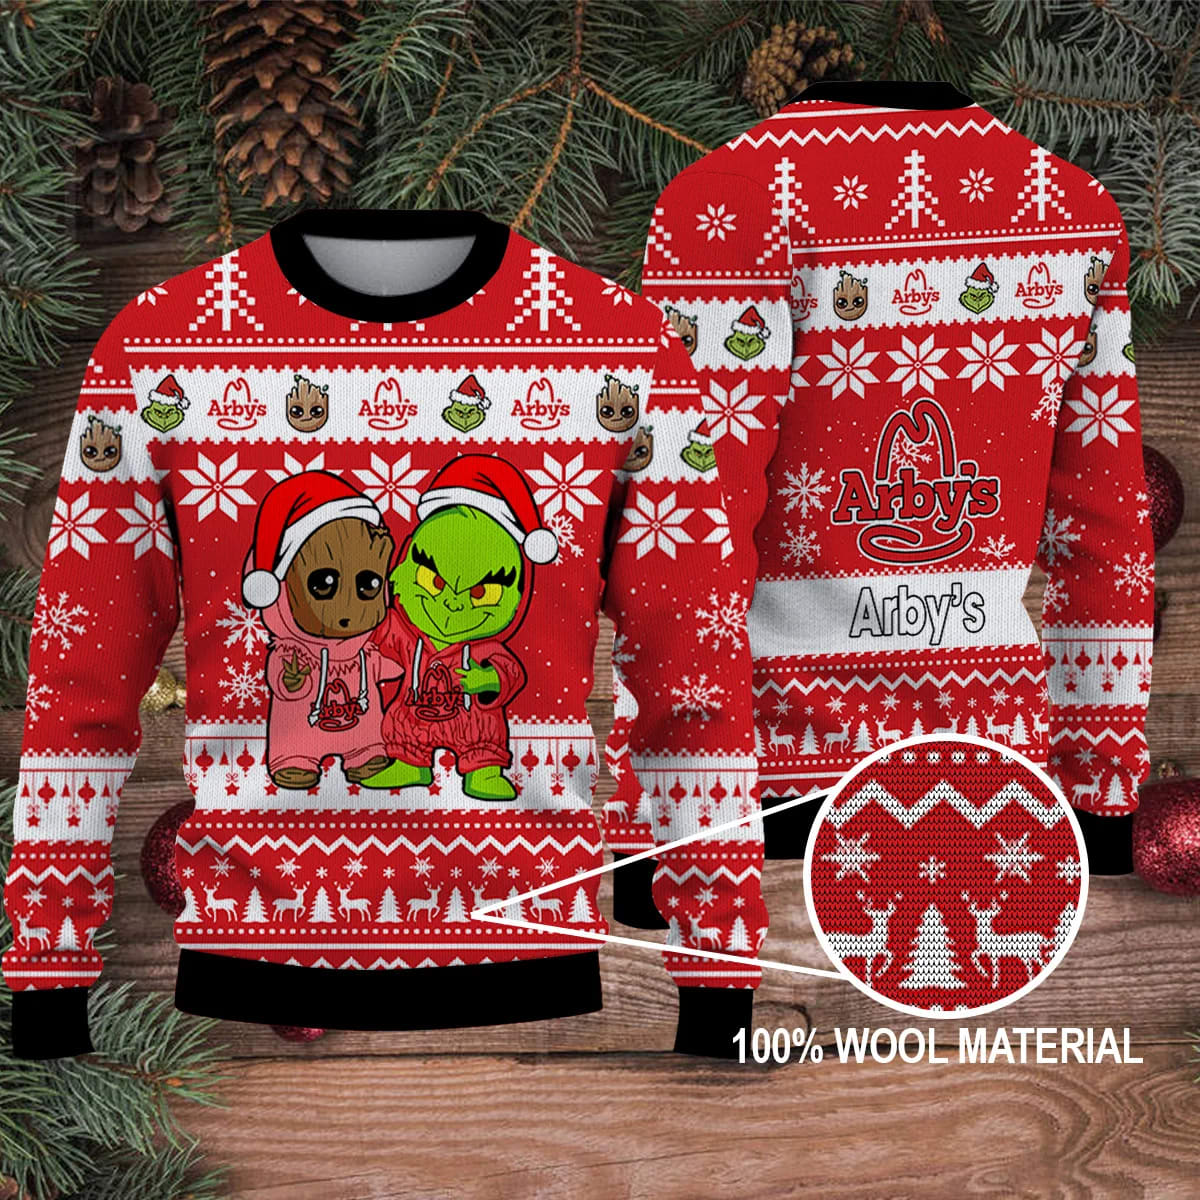 Grinch Movie 2023 The Grinch Merry Christmas Ugly Sweater Arby S Henldq.jpg